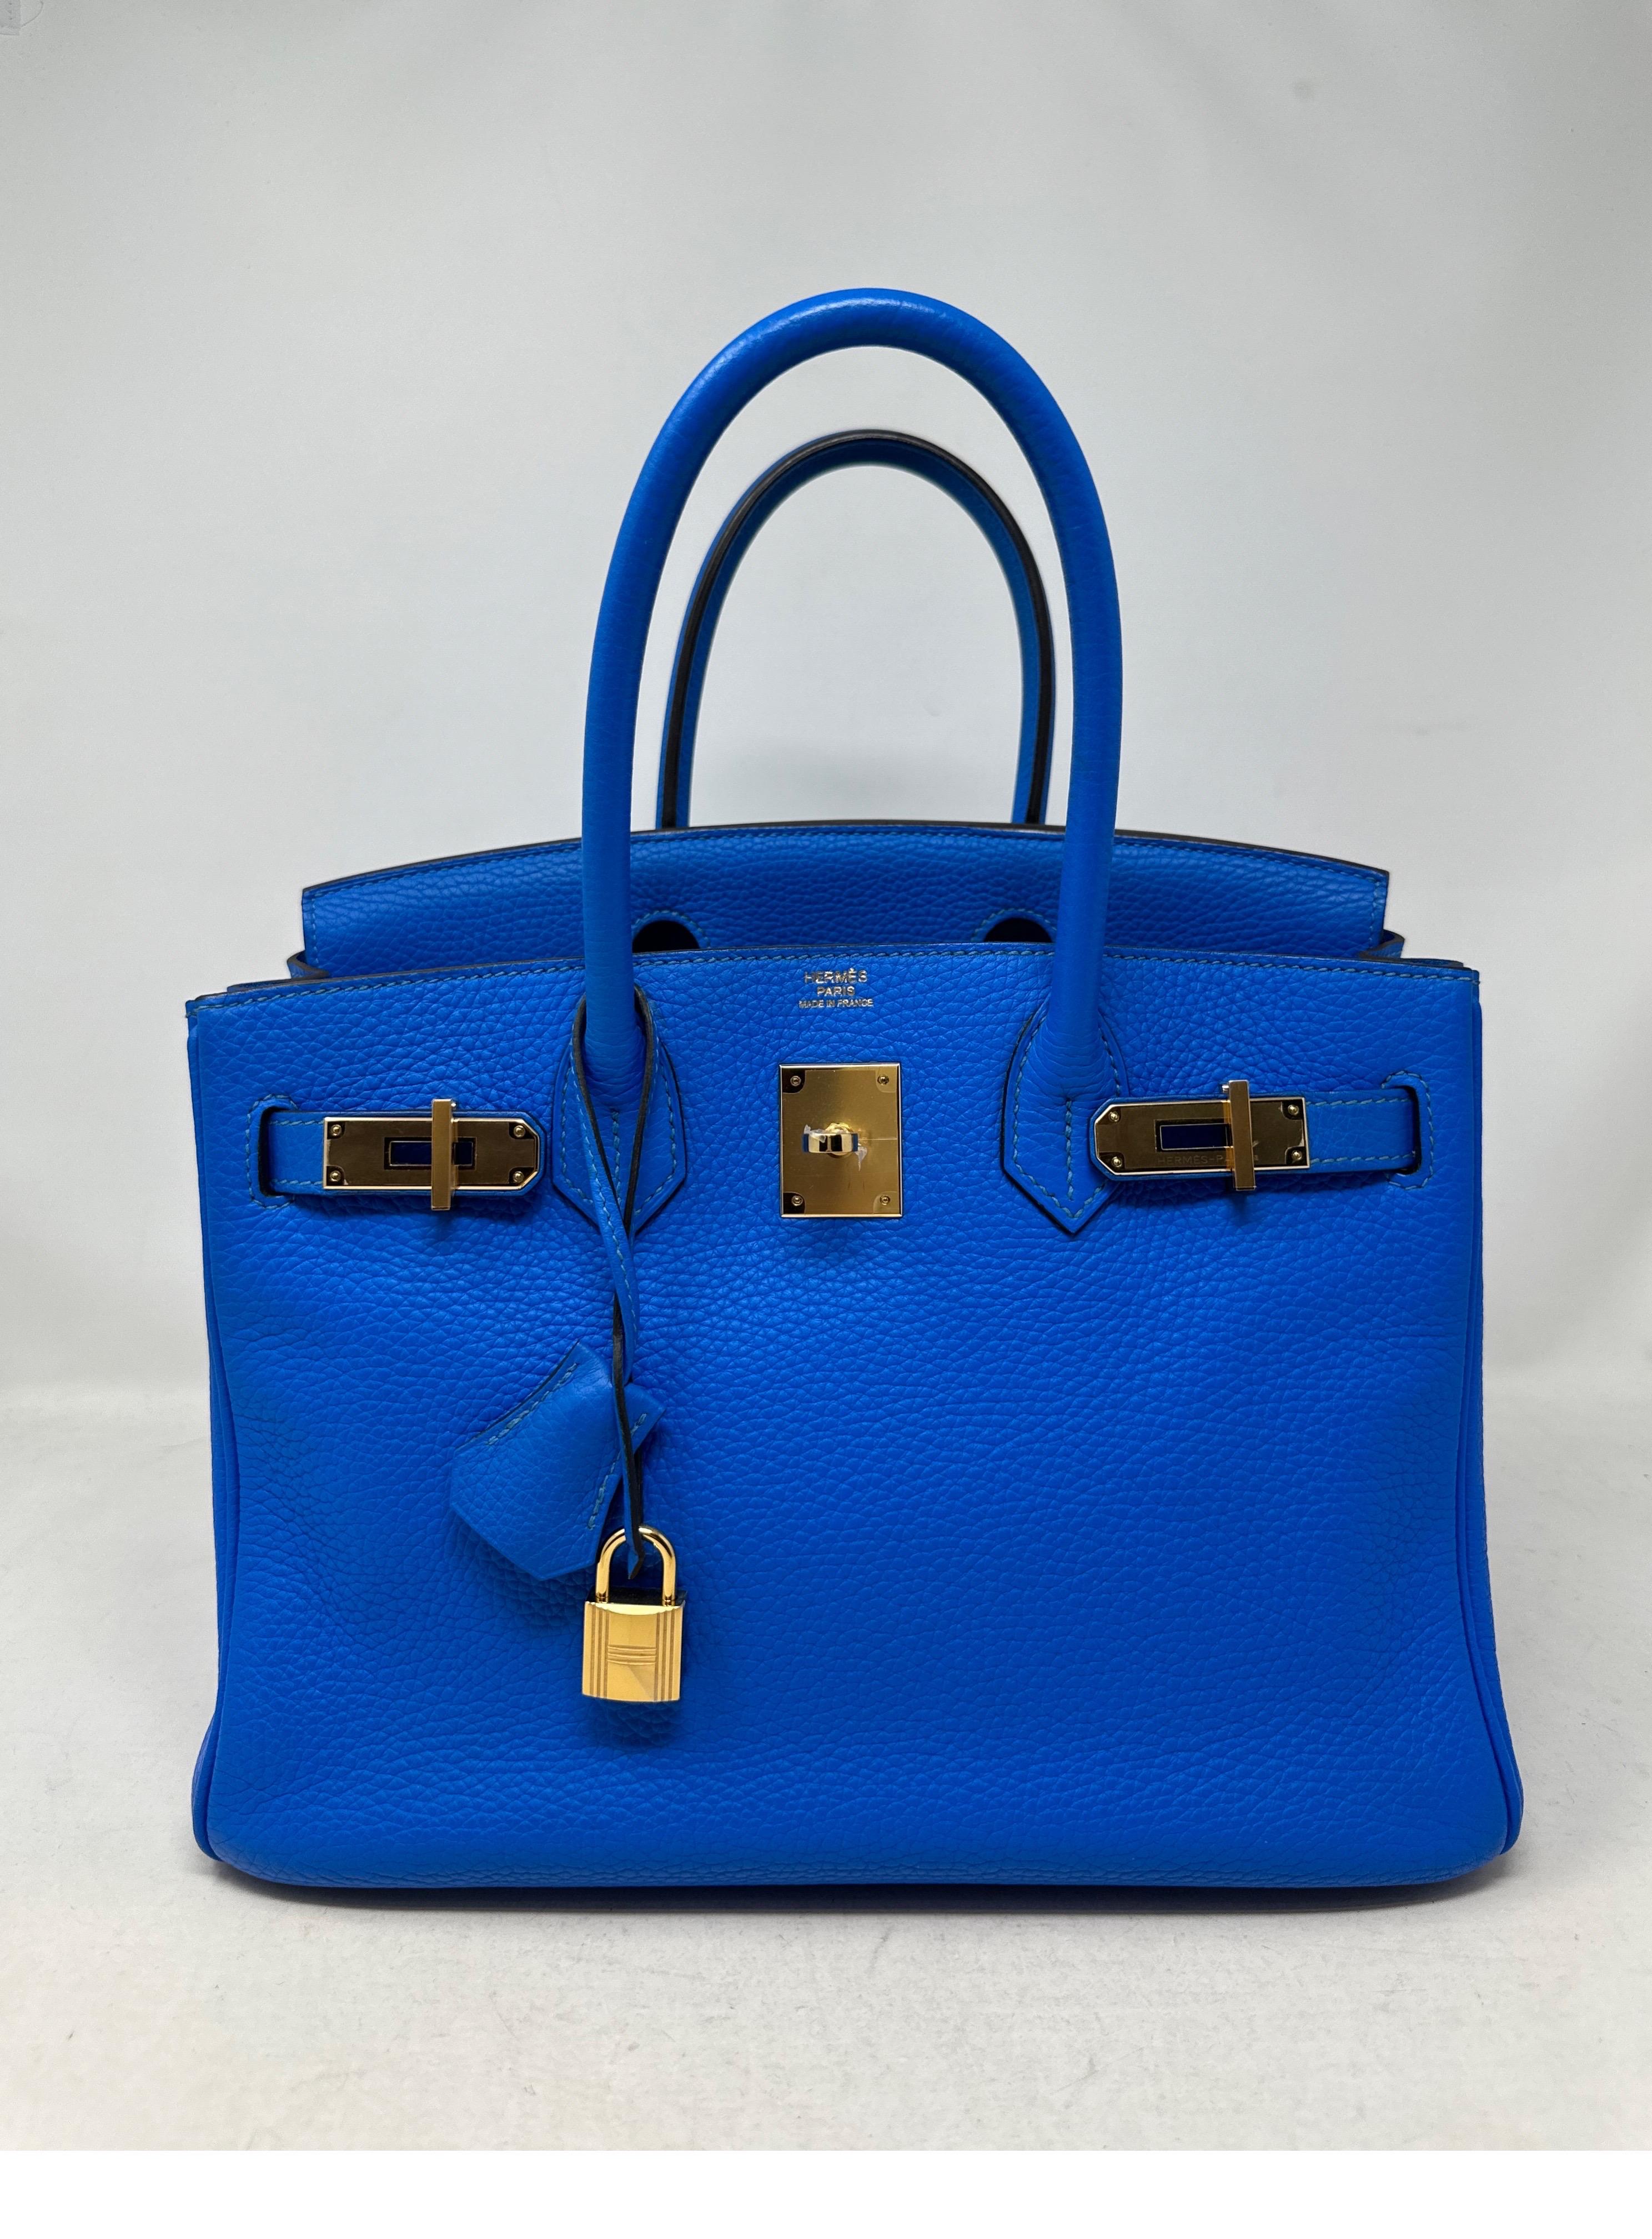 Hermes Blue Hydra Birkin 30 Bag. Excellent condition. Gold hardware. Clemence leather. P square stamp. Interior clean. Includes clochette, lock, keys, and dust bag. Guaranteed authentic. 